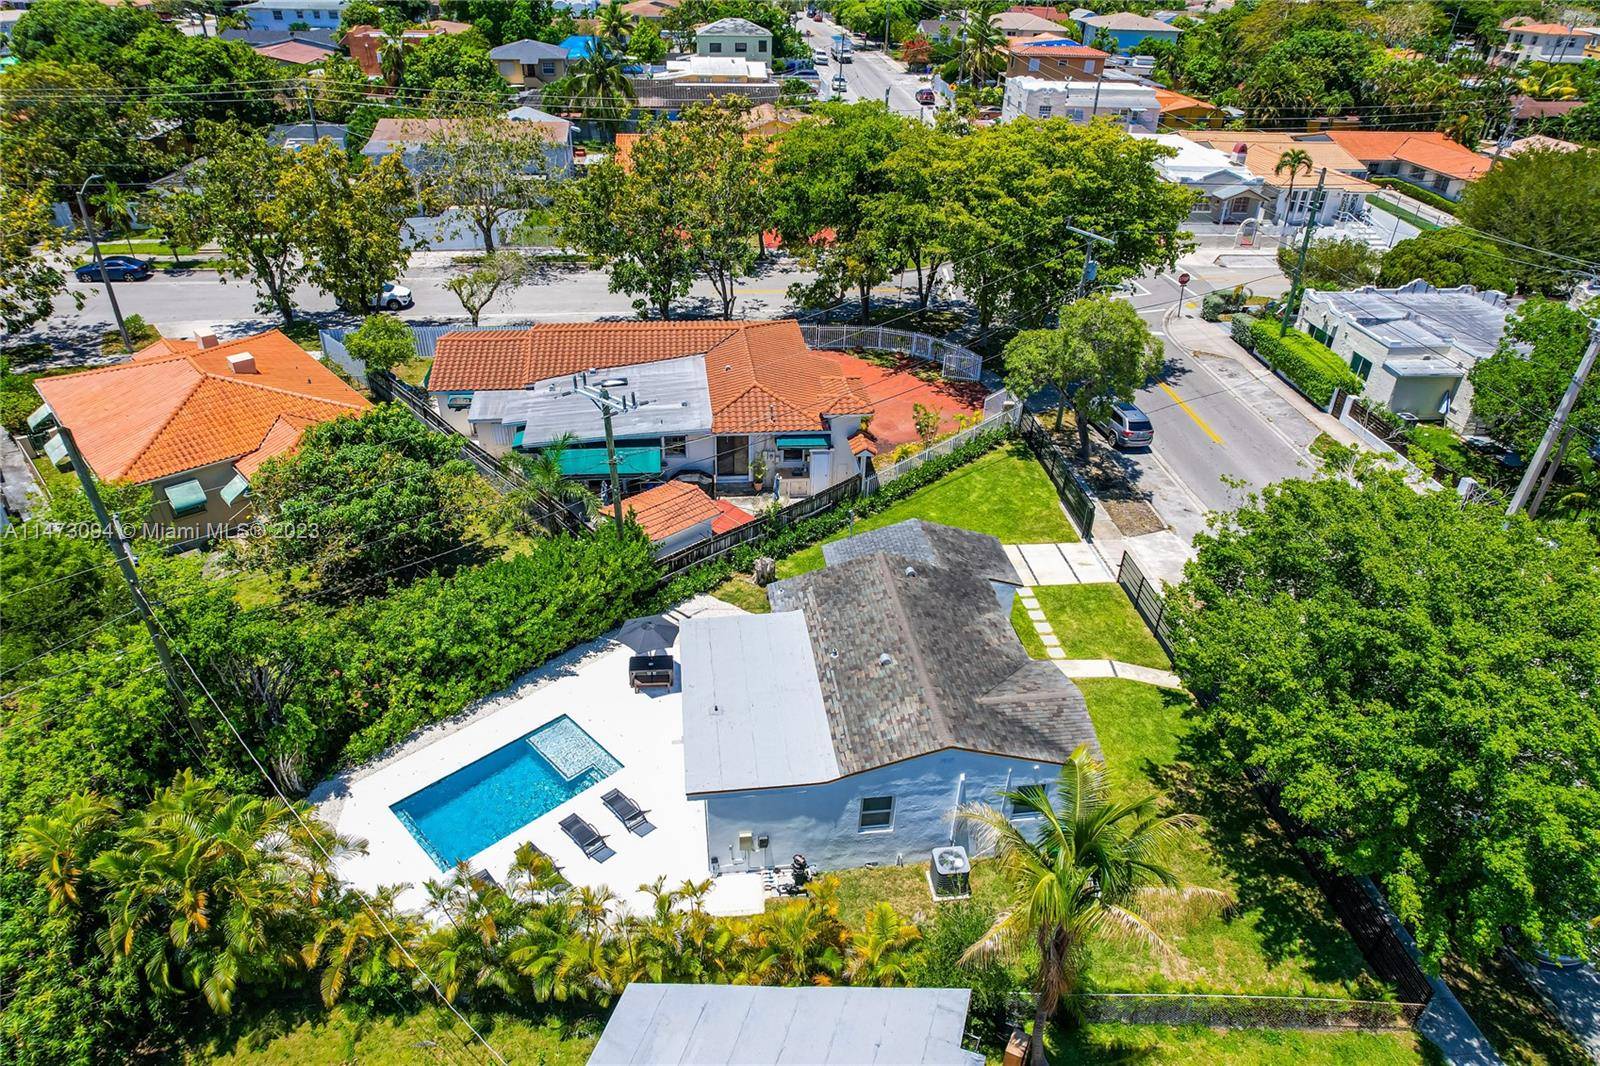 Charming 2 Bed, 1 Bath Gem in the Heart of Brickell Step into luxury with this fully remodeled, single story home in a prime Brickell location.